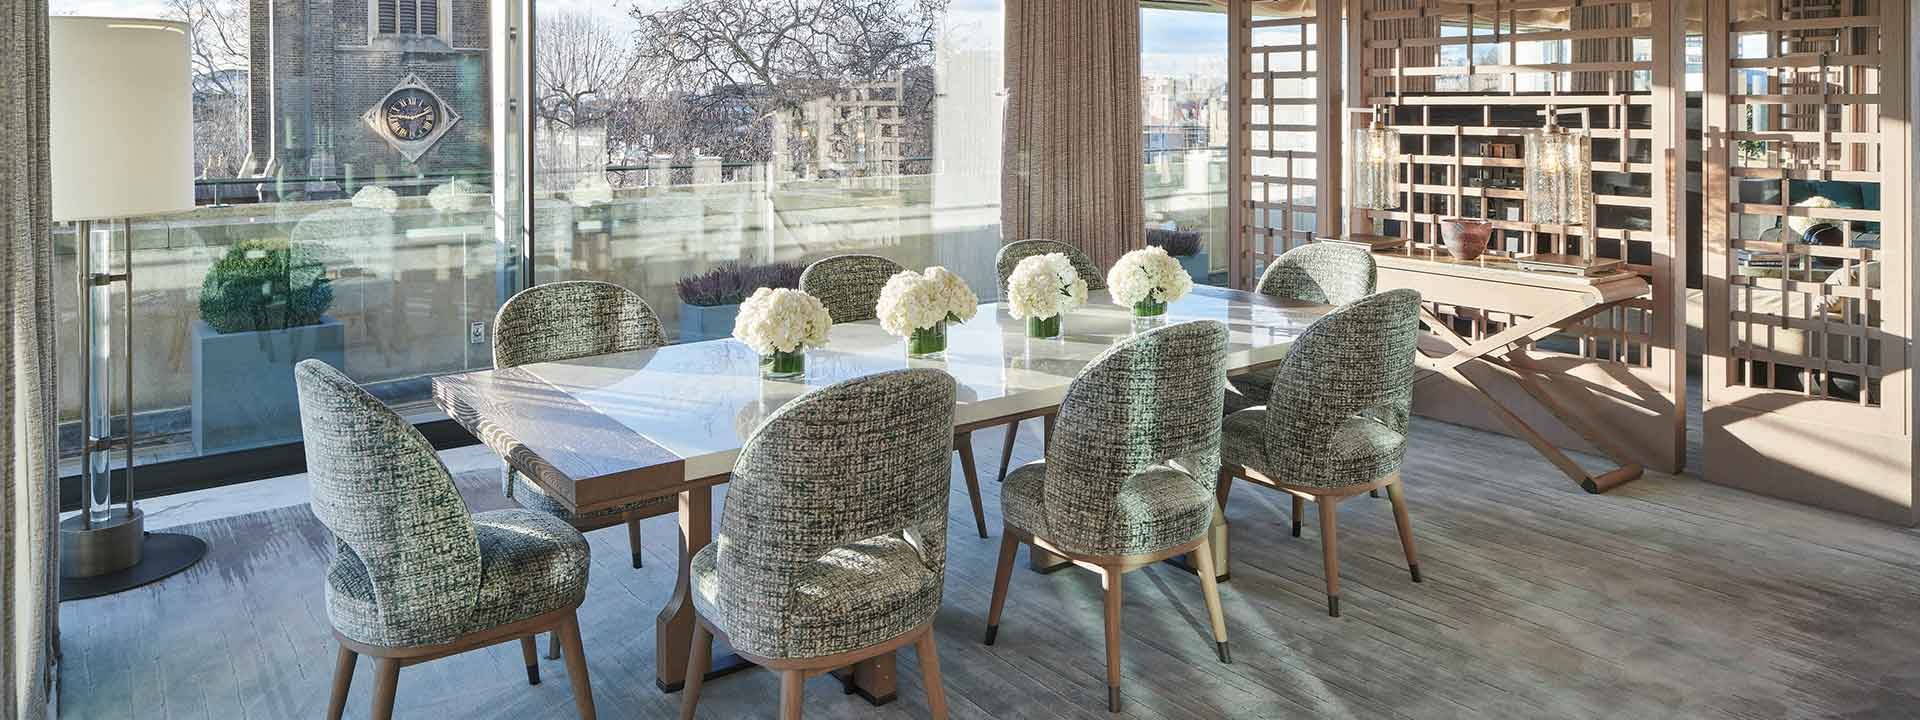 Crescent Pavilion Penthouse at The Berkeley - dining area view with dining table and chairs.